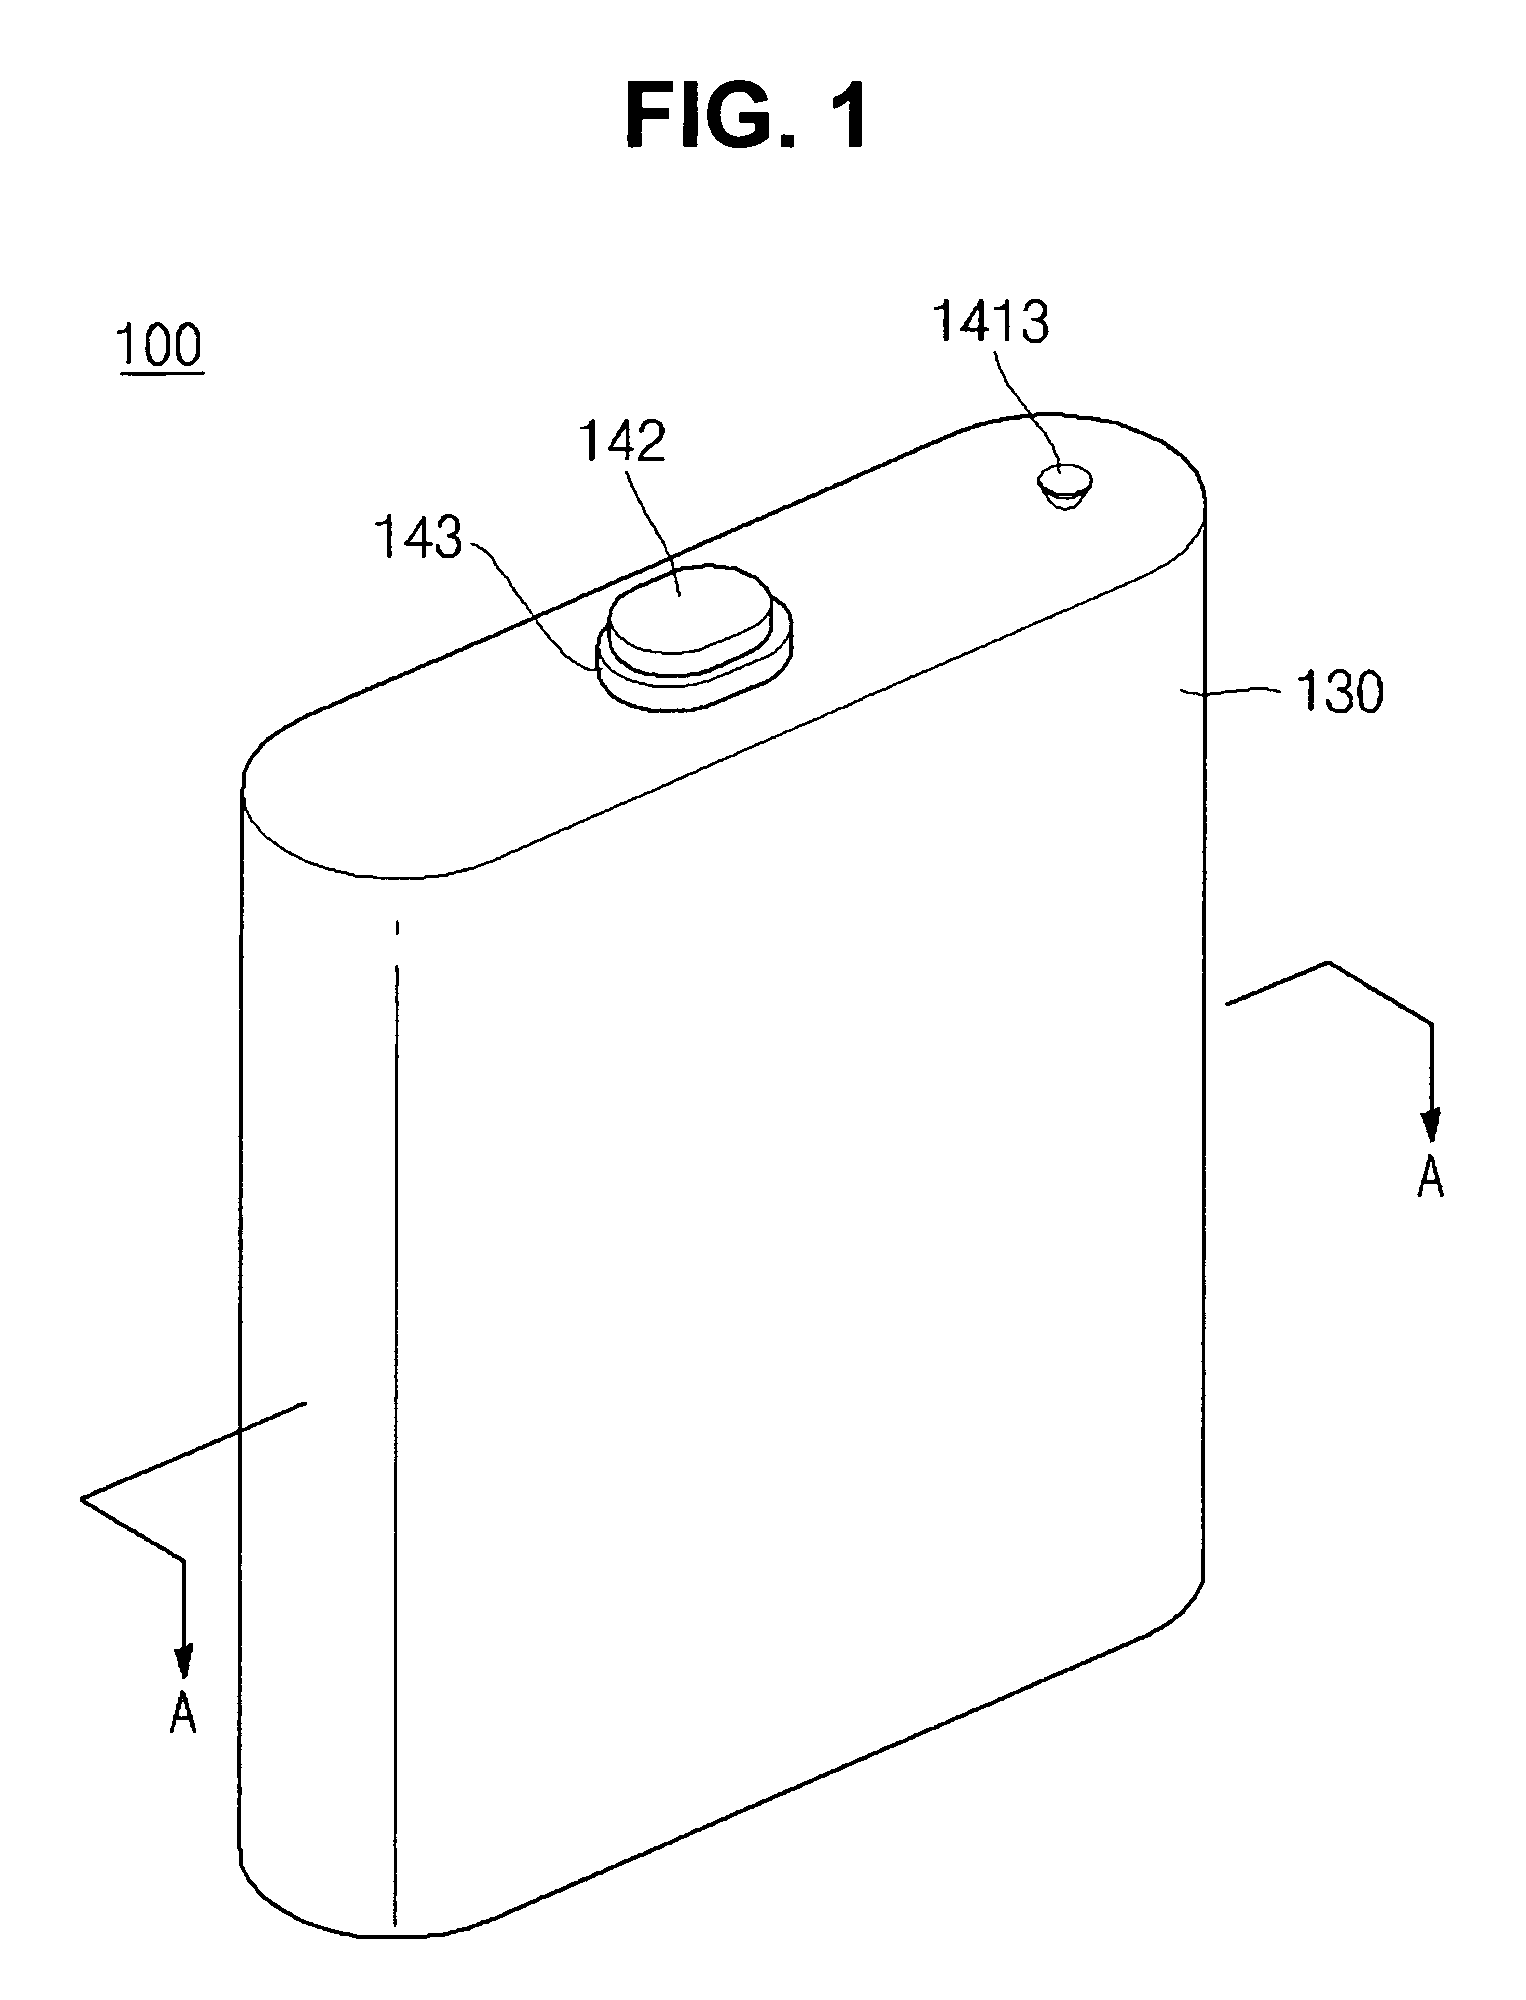 Secondary battery with finishing tapes